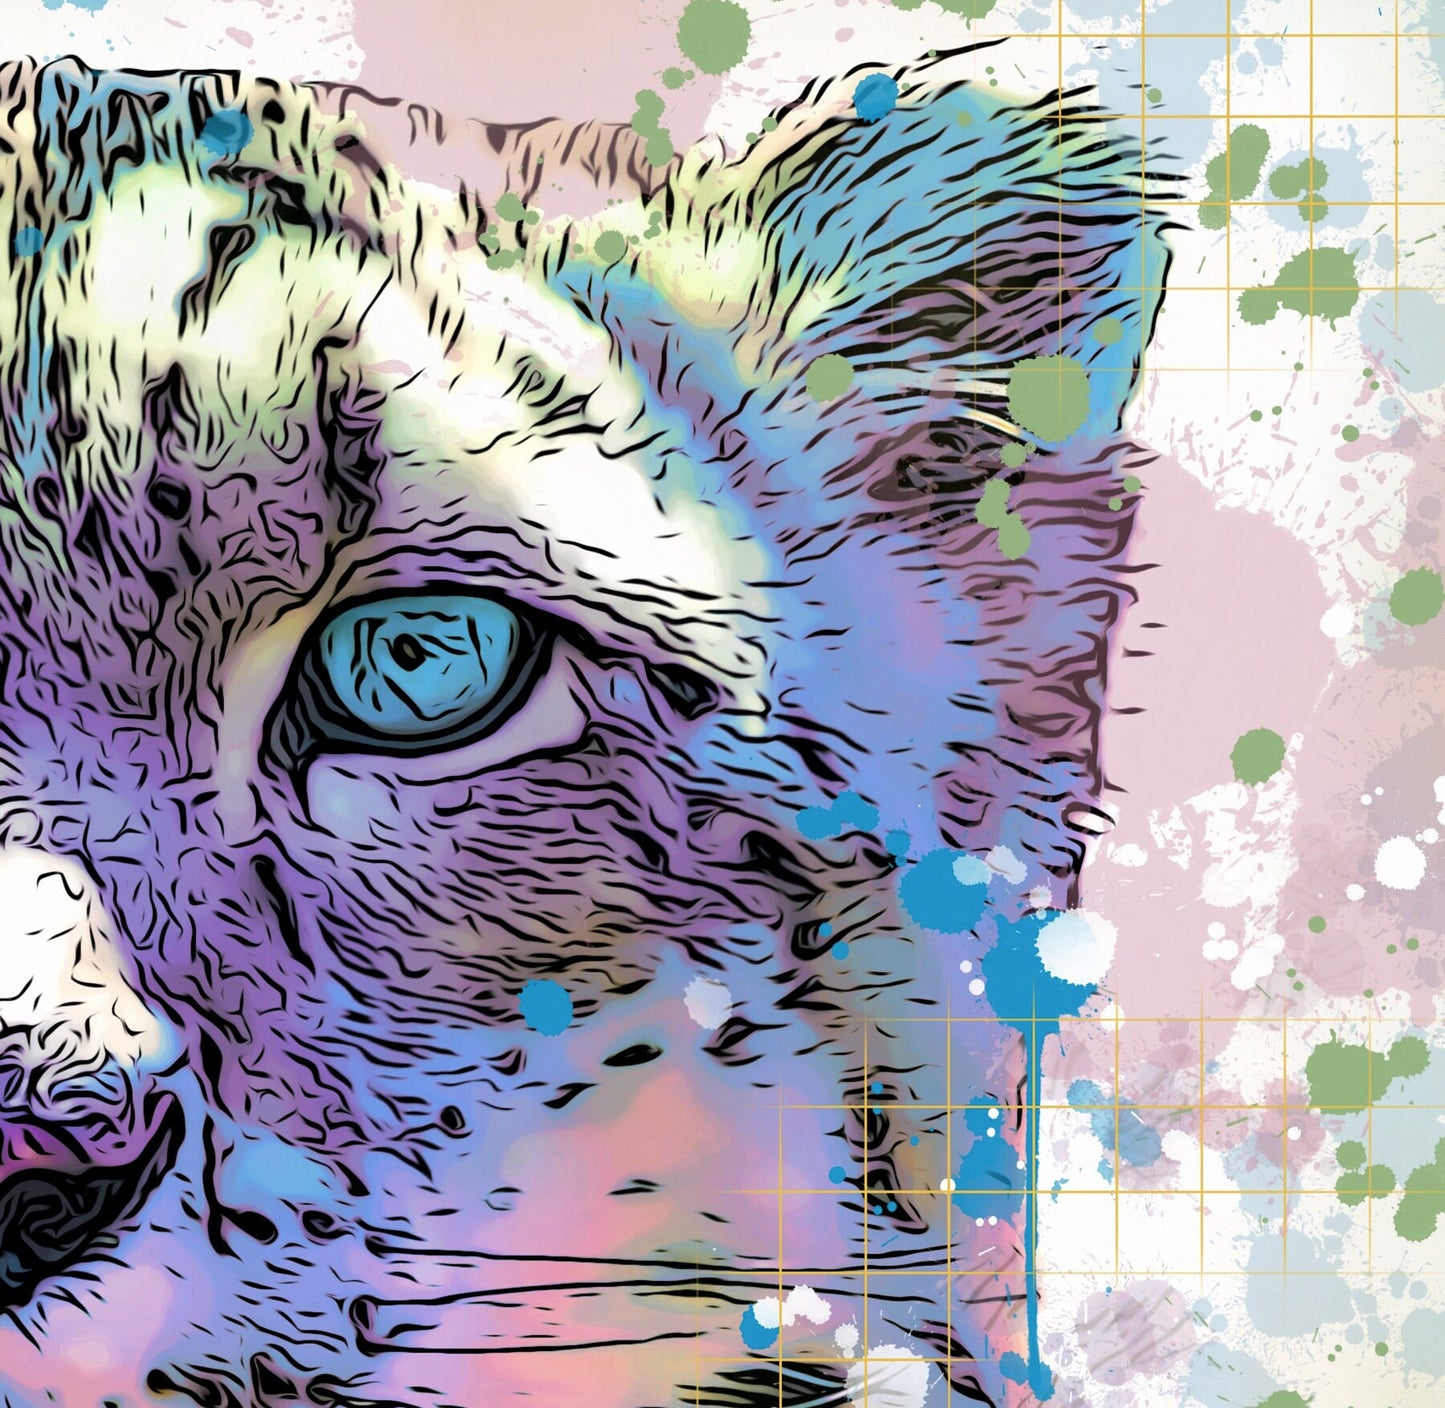 Snow Leopard Art - Colorful Big Cat Print on CANVAS or PAPER by Krystle Cole *Each Print Hand Signed*